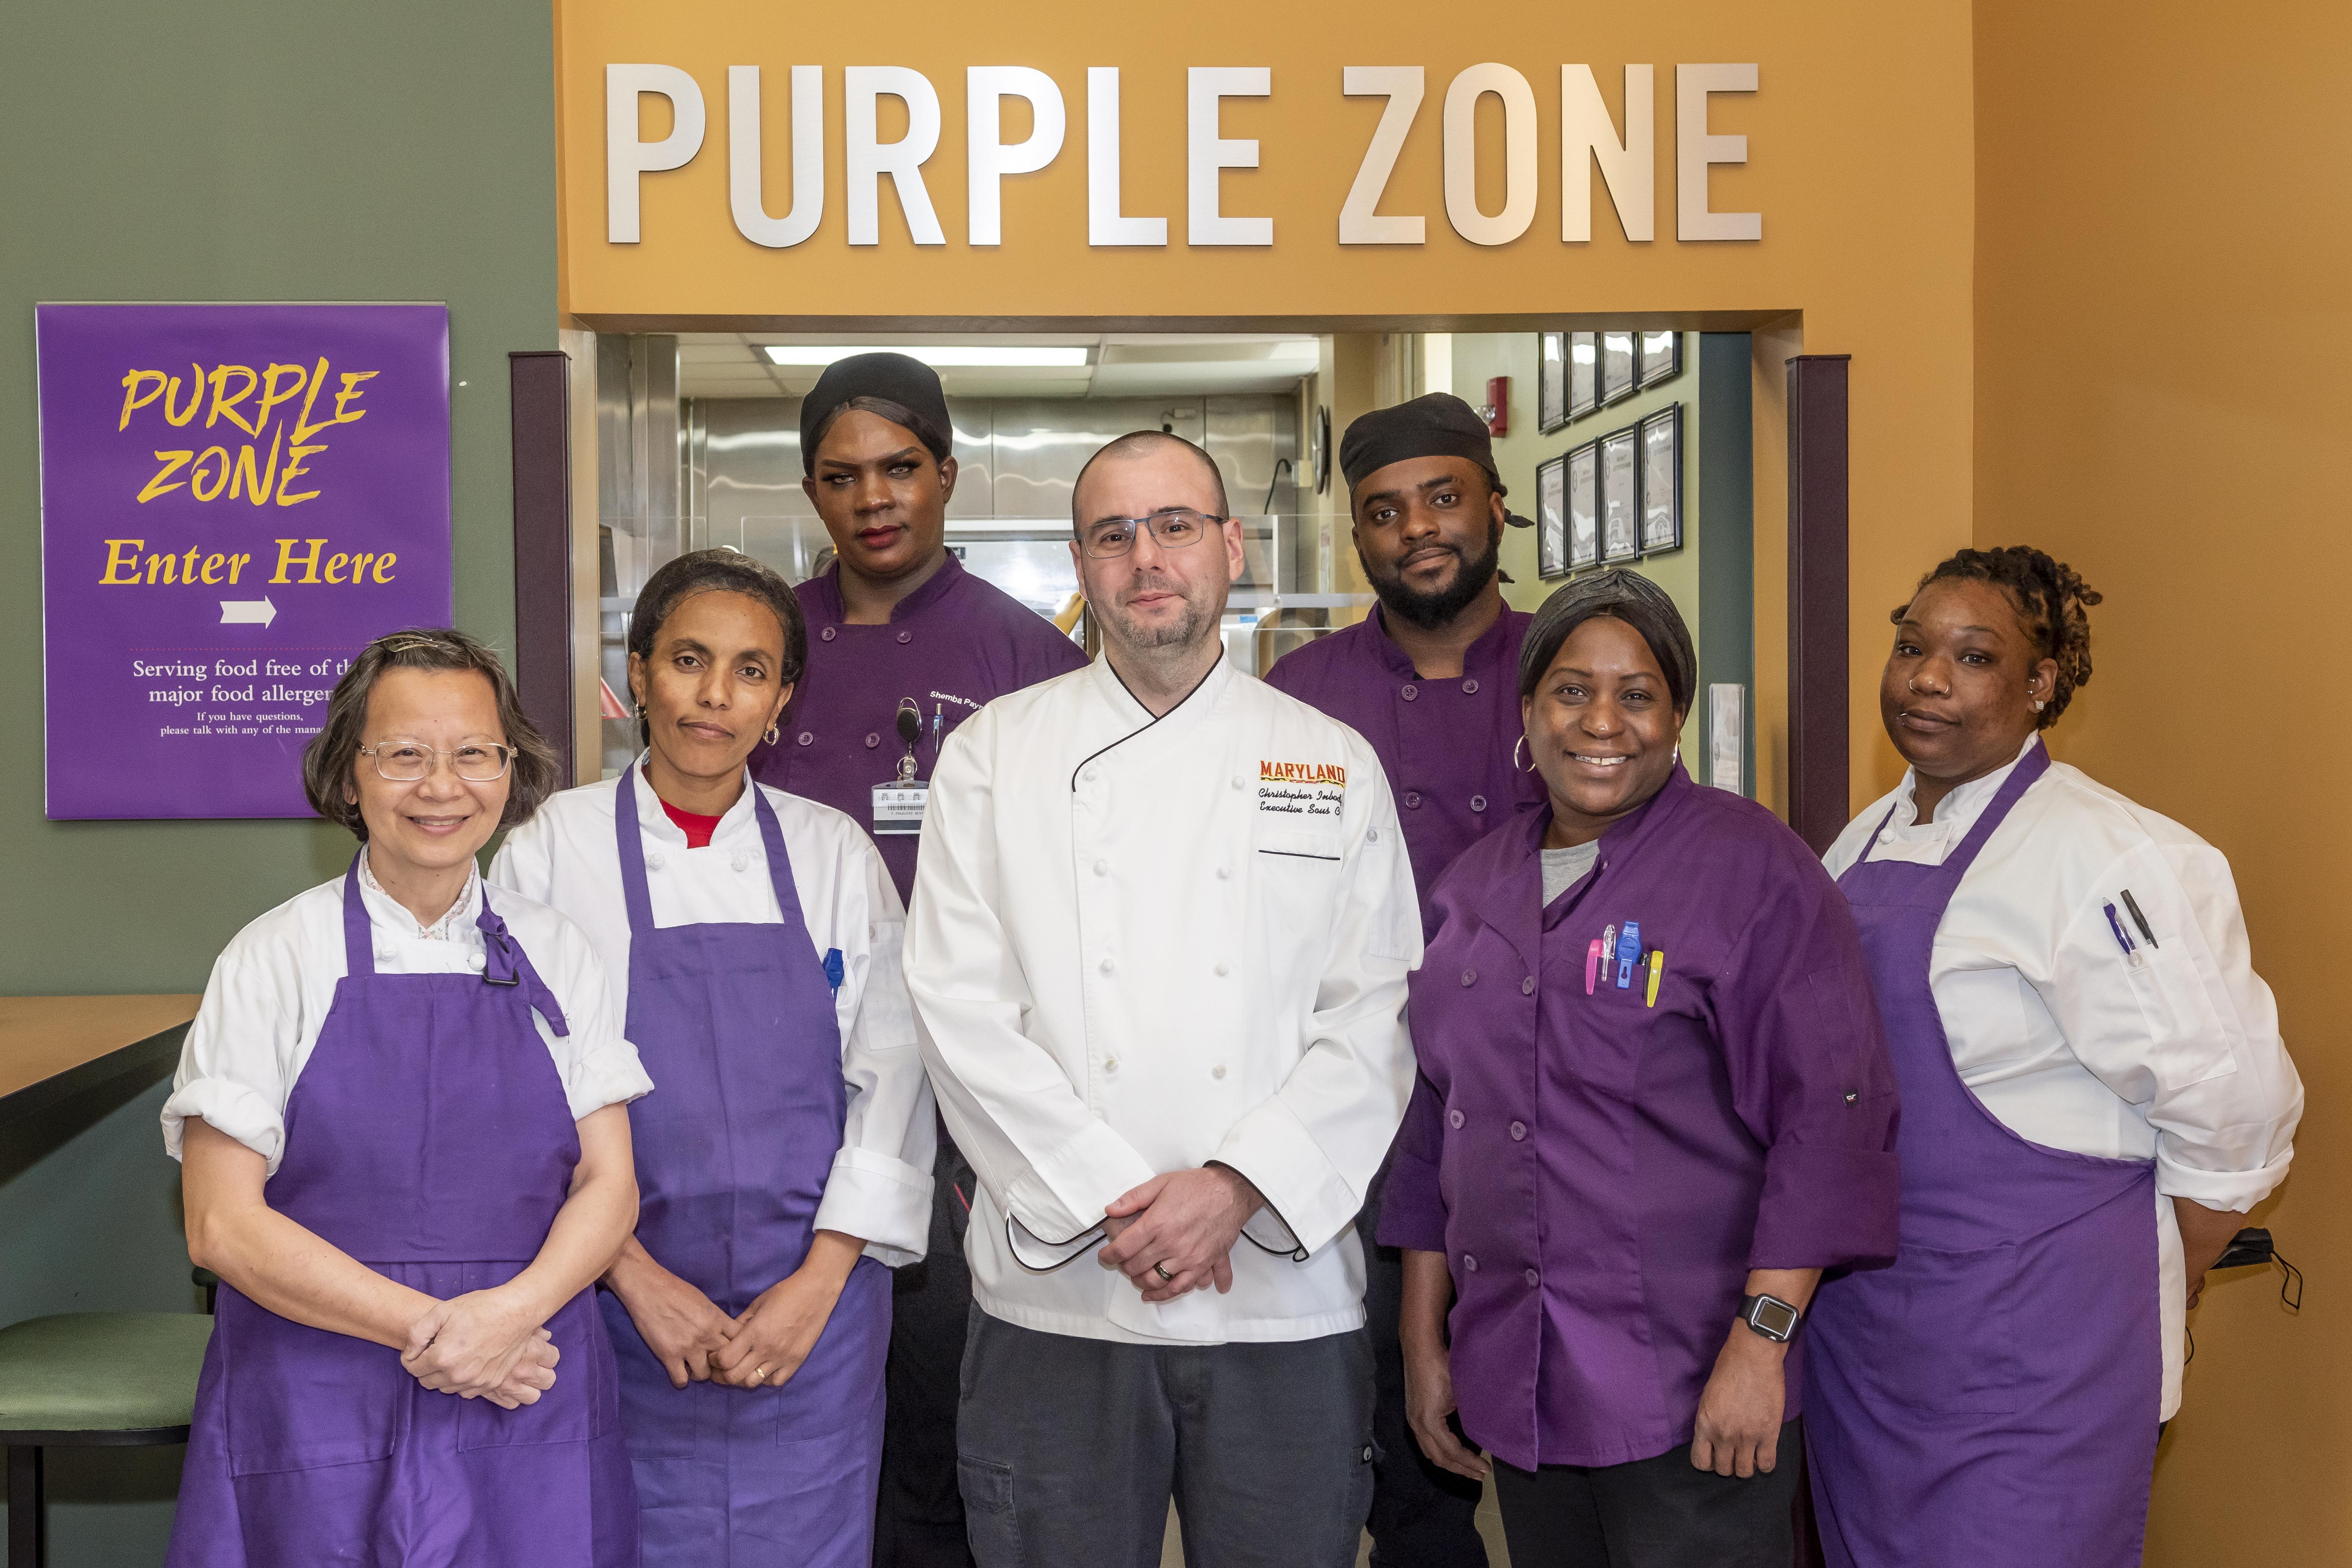 purple zone chefs and servers